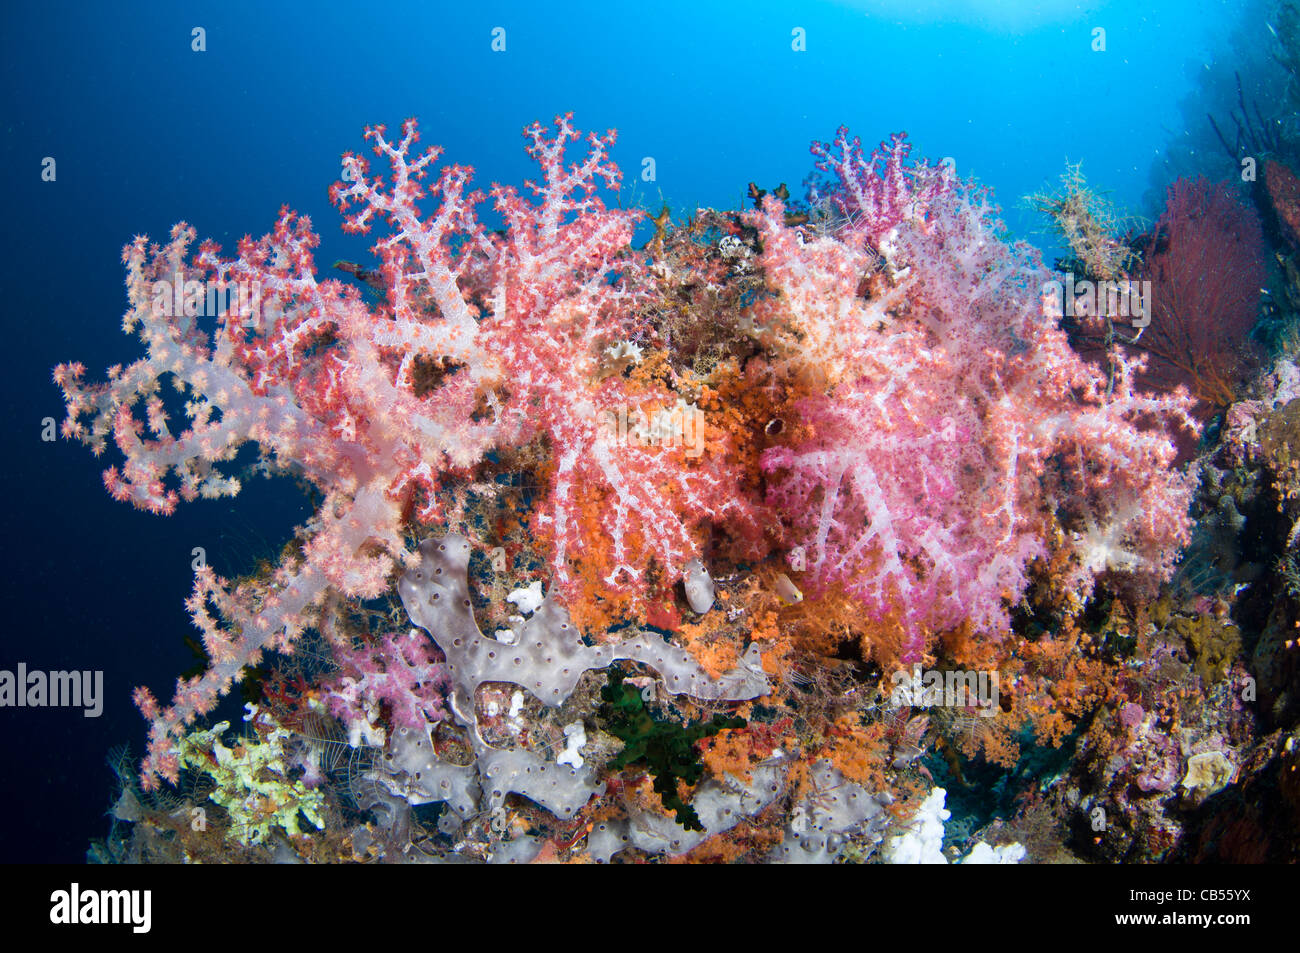 Soft coral and tropical fish, Dendronephthya sp., Misool, Raja Ampat, West Papua, Indonesia, Pacific Ocean Stock Photo